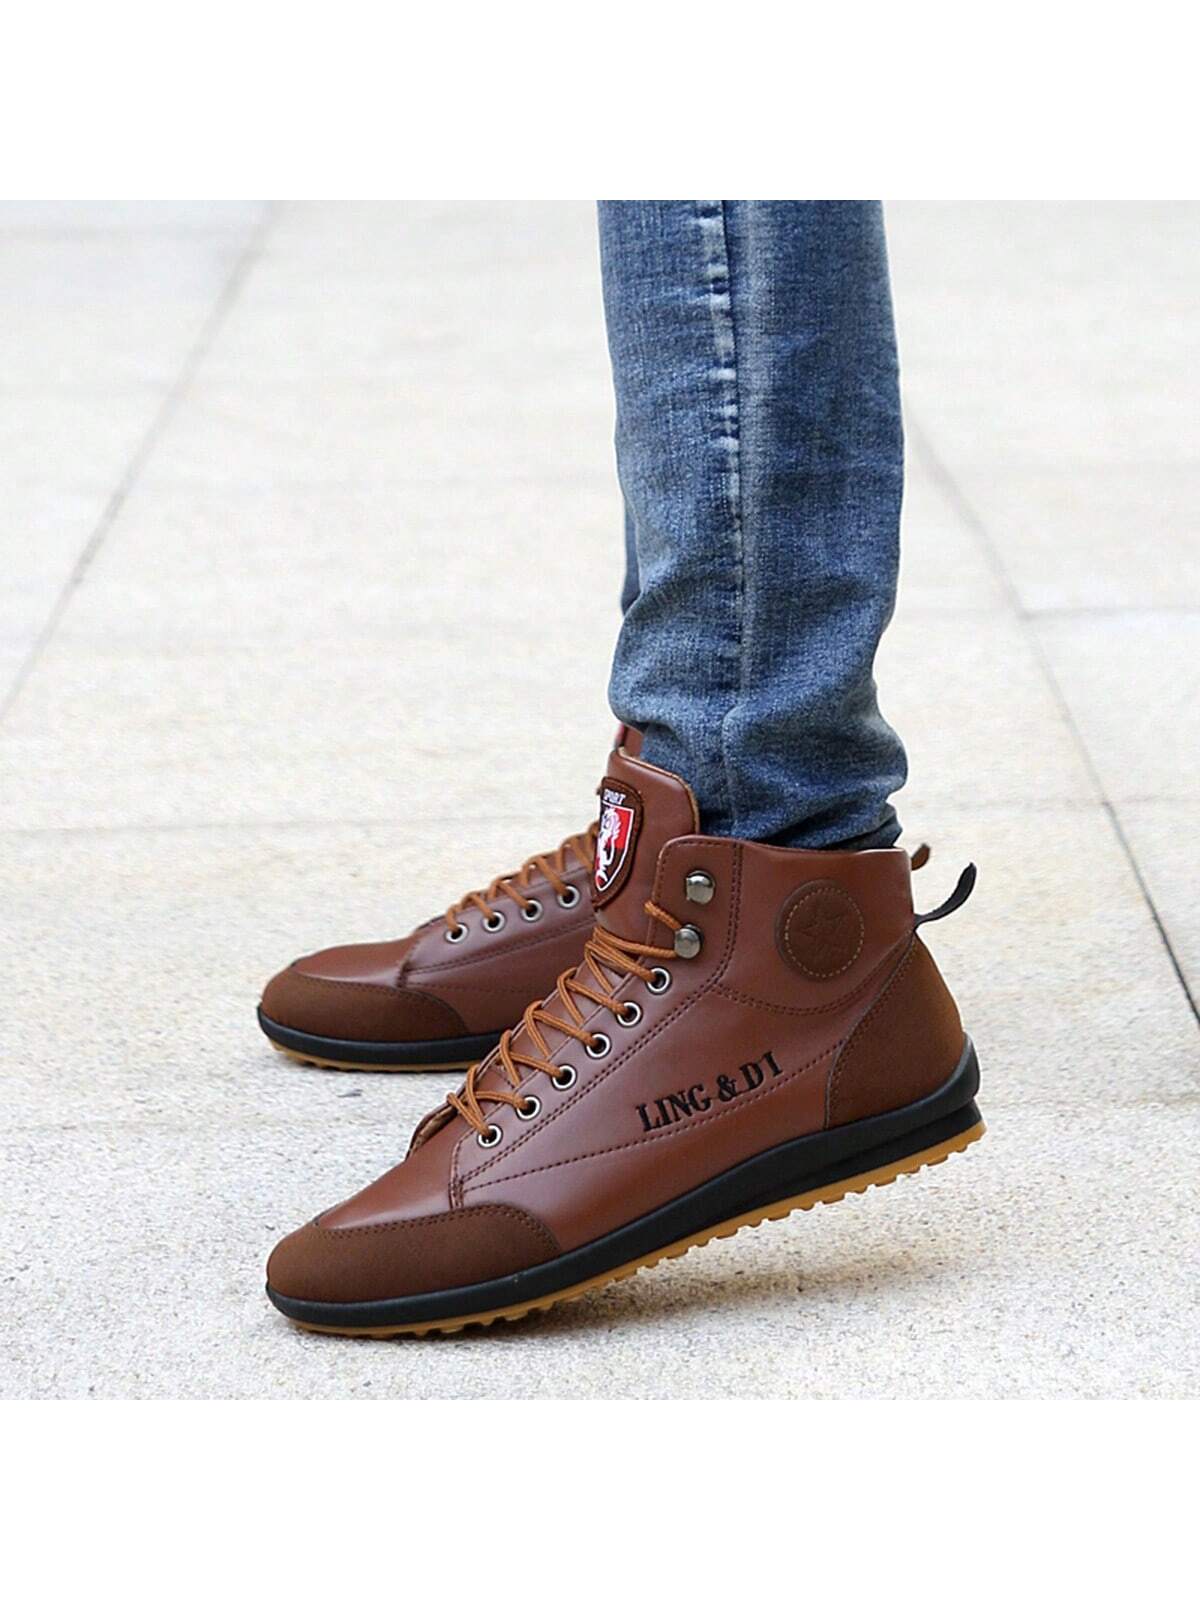 Men's Mid-top Lace-up Work Shoe With Anti-slip Sole, Casual And Comfortable Sneaker With Good Breathability And Unique Style, Suitable For Driving